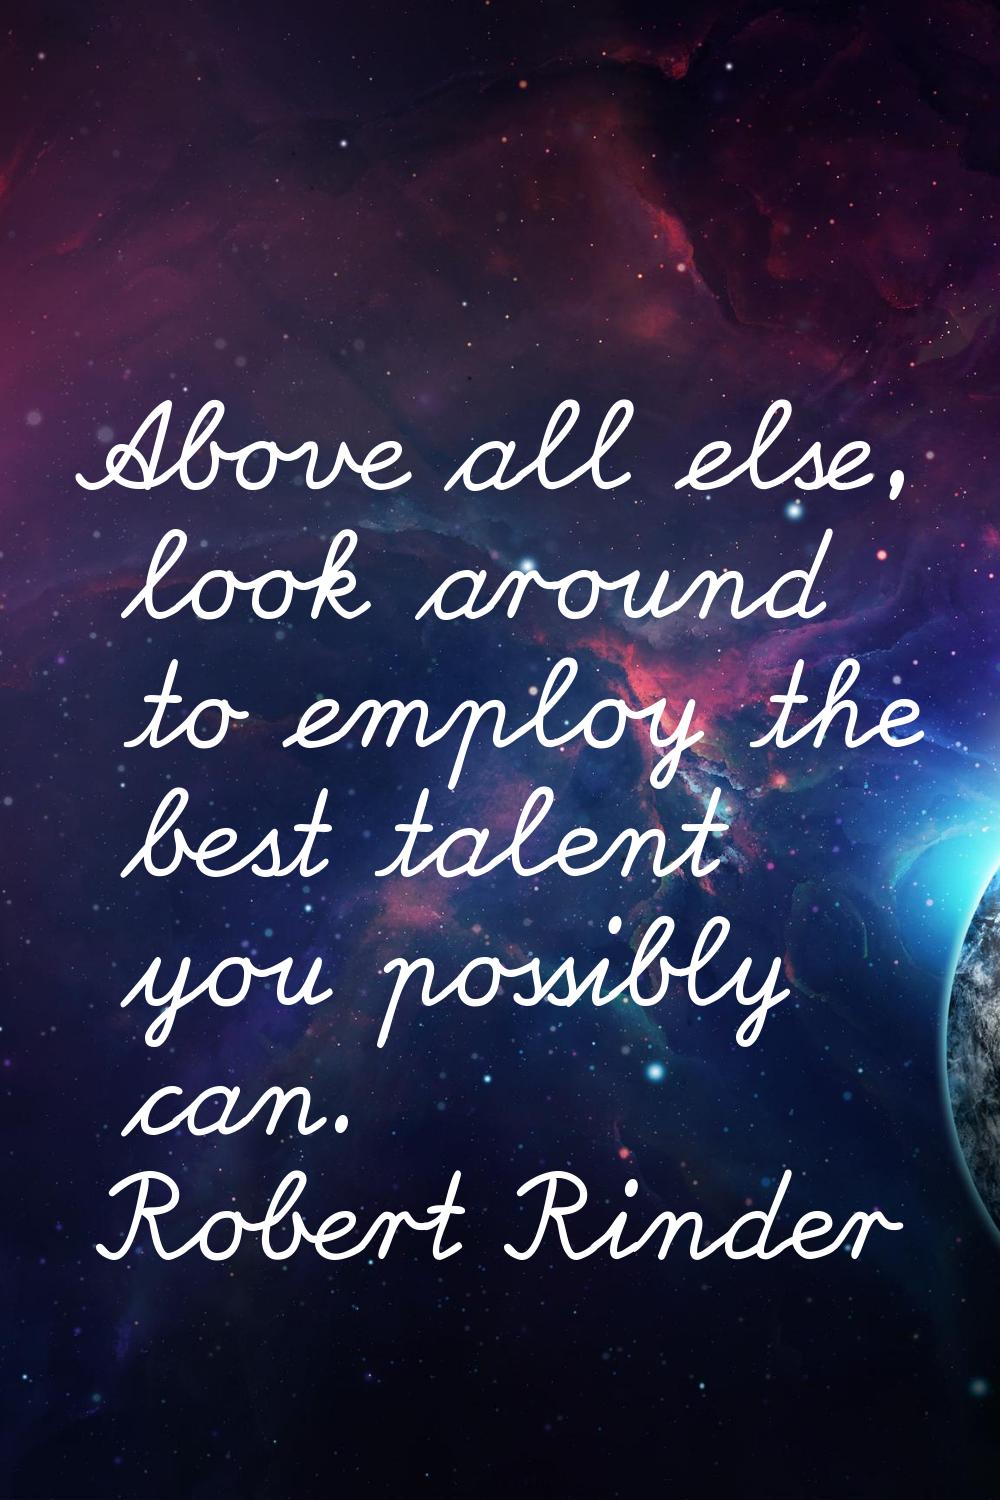 Above all else, look around to employ the best talent you possibly can.